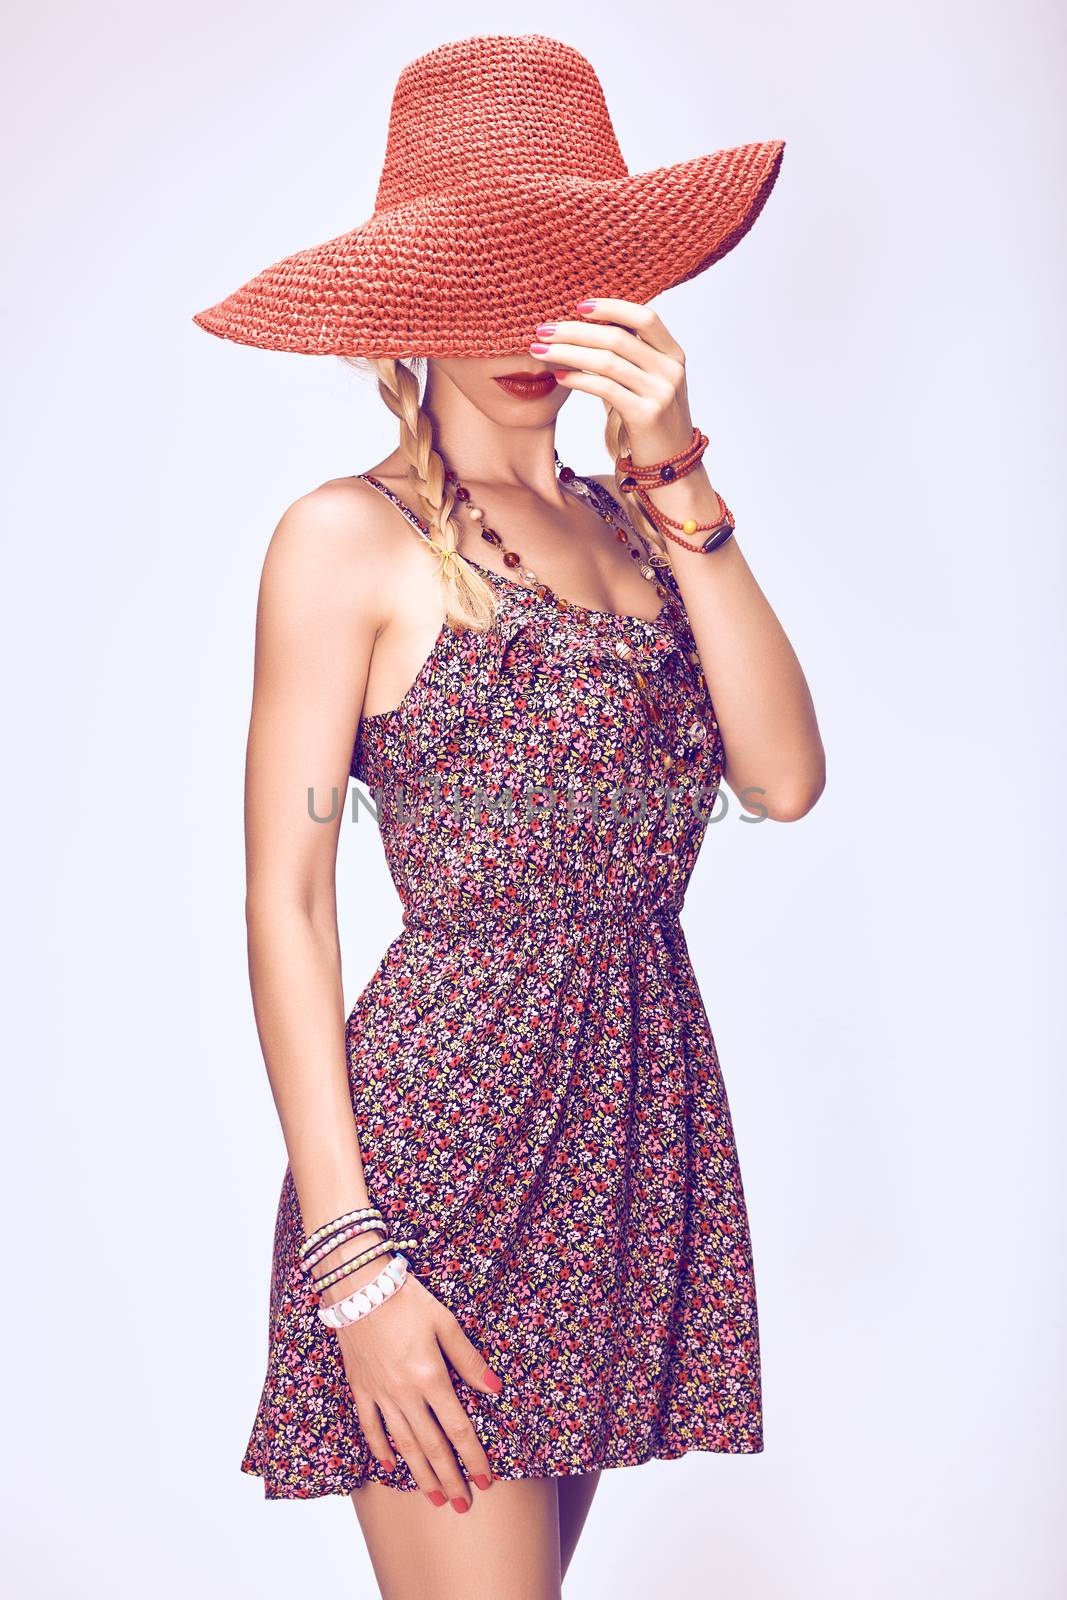 Hippie boho playful woman in hat.Relax, having fun by 918